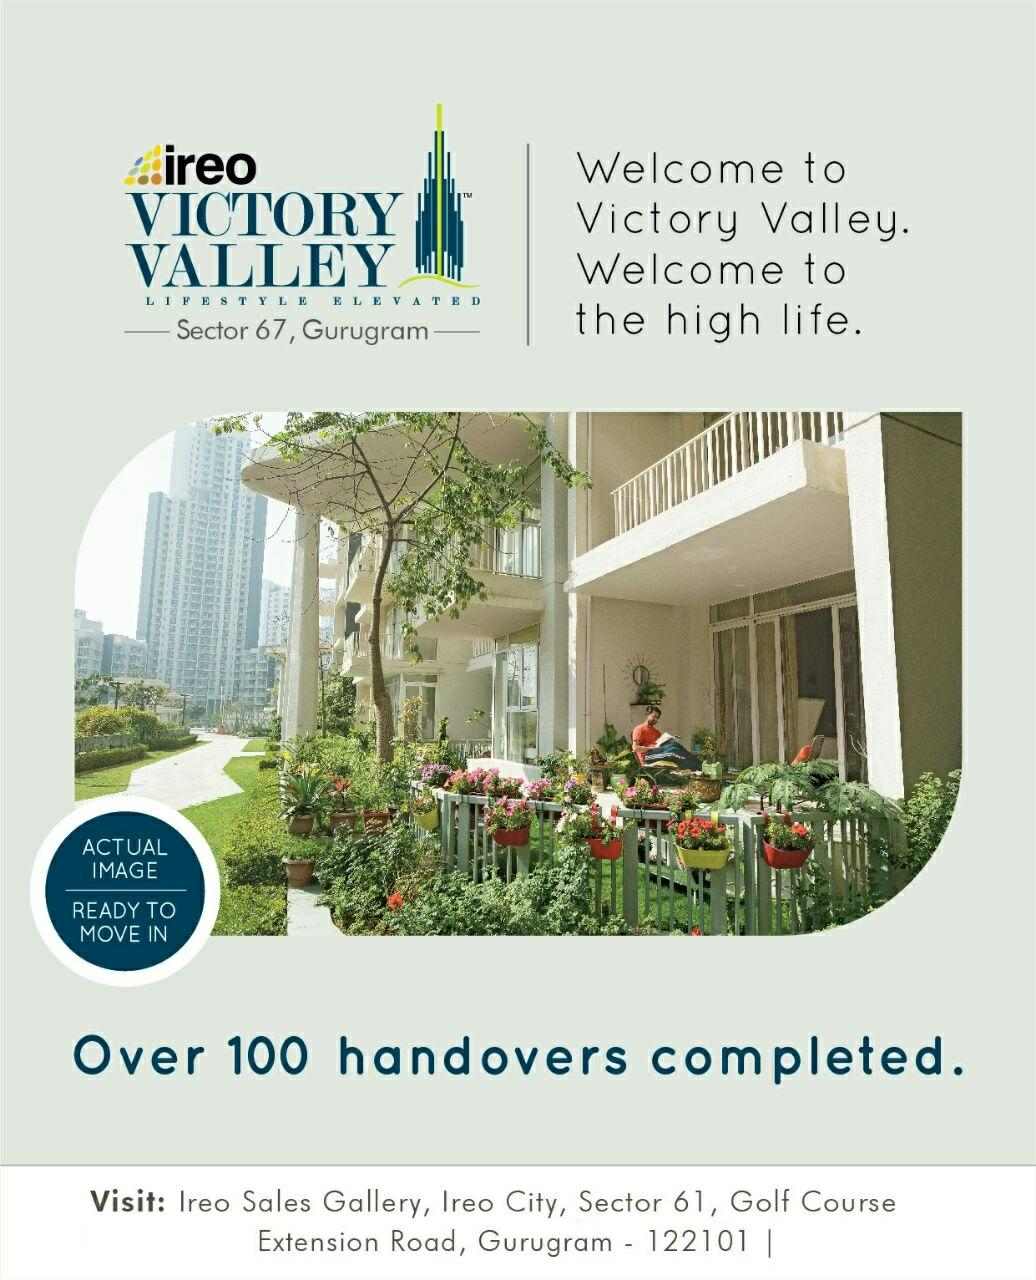 Ireo Victory Valley is ready to move in Gurgaon Update